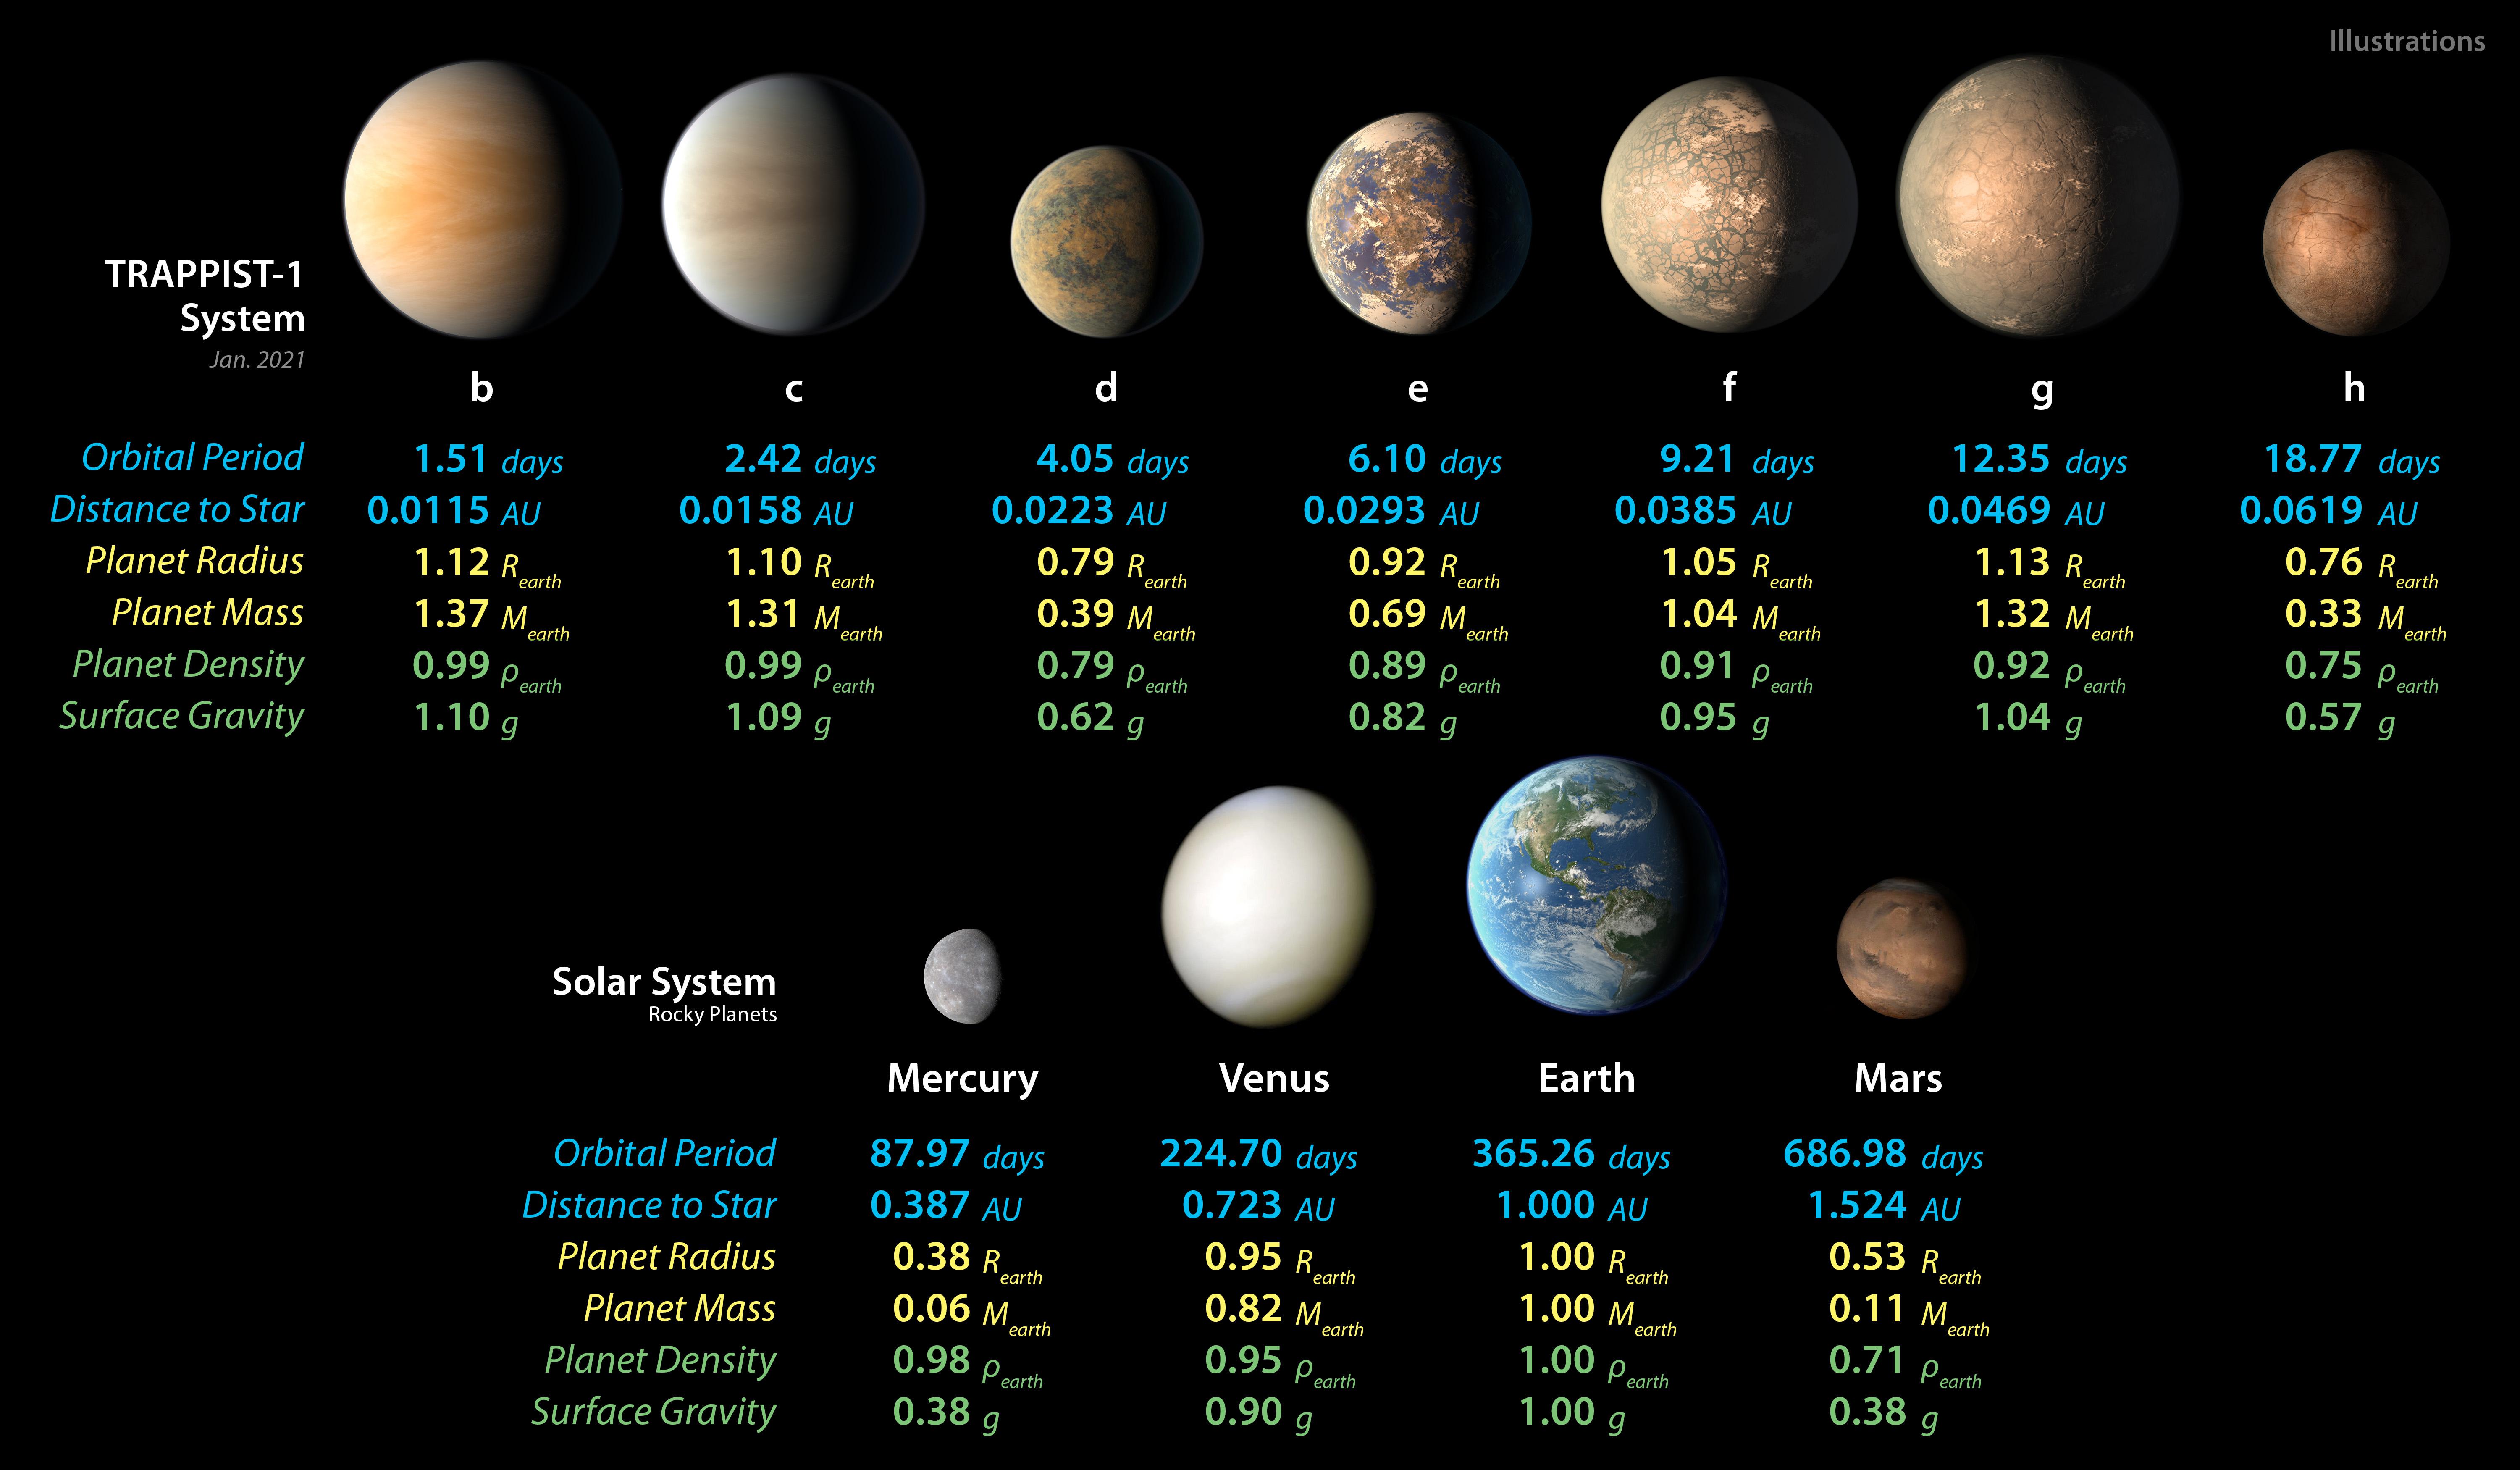 PIA24373: TRAPPIST-1 and Solar System Planet Stats